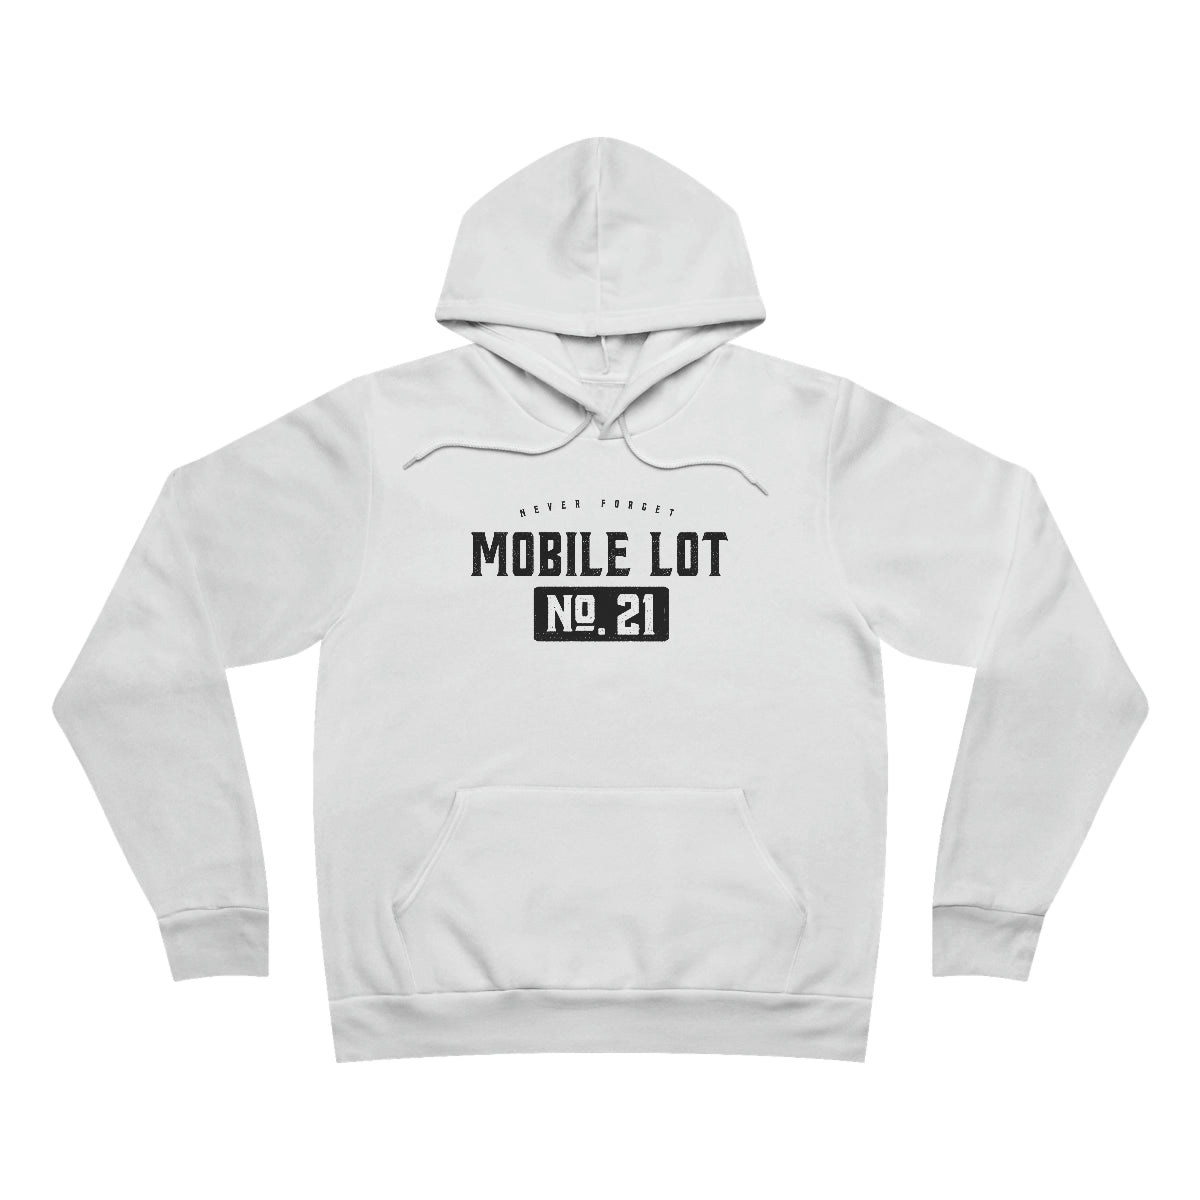 A memory to keep you grounded and motivated. Inspired by Coach Joe's humble days, this unisex Sponge Fleece Pullover Hoodie